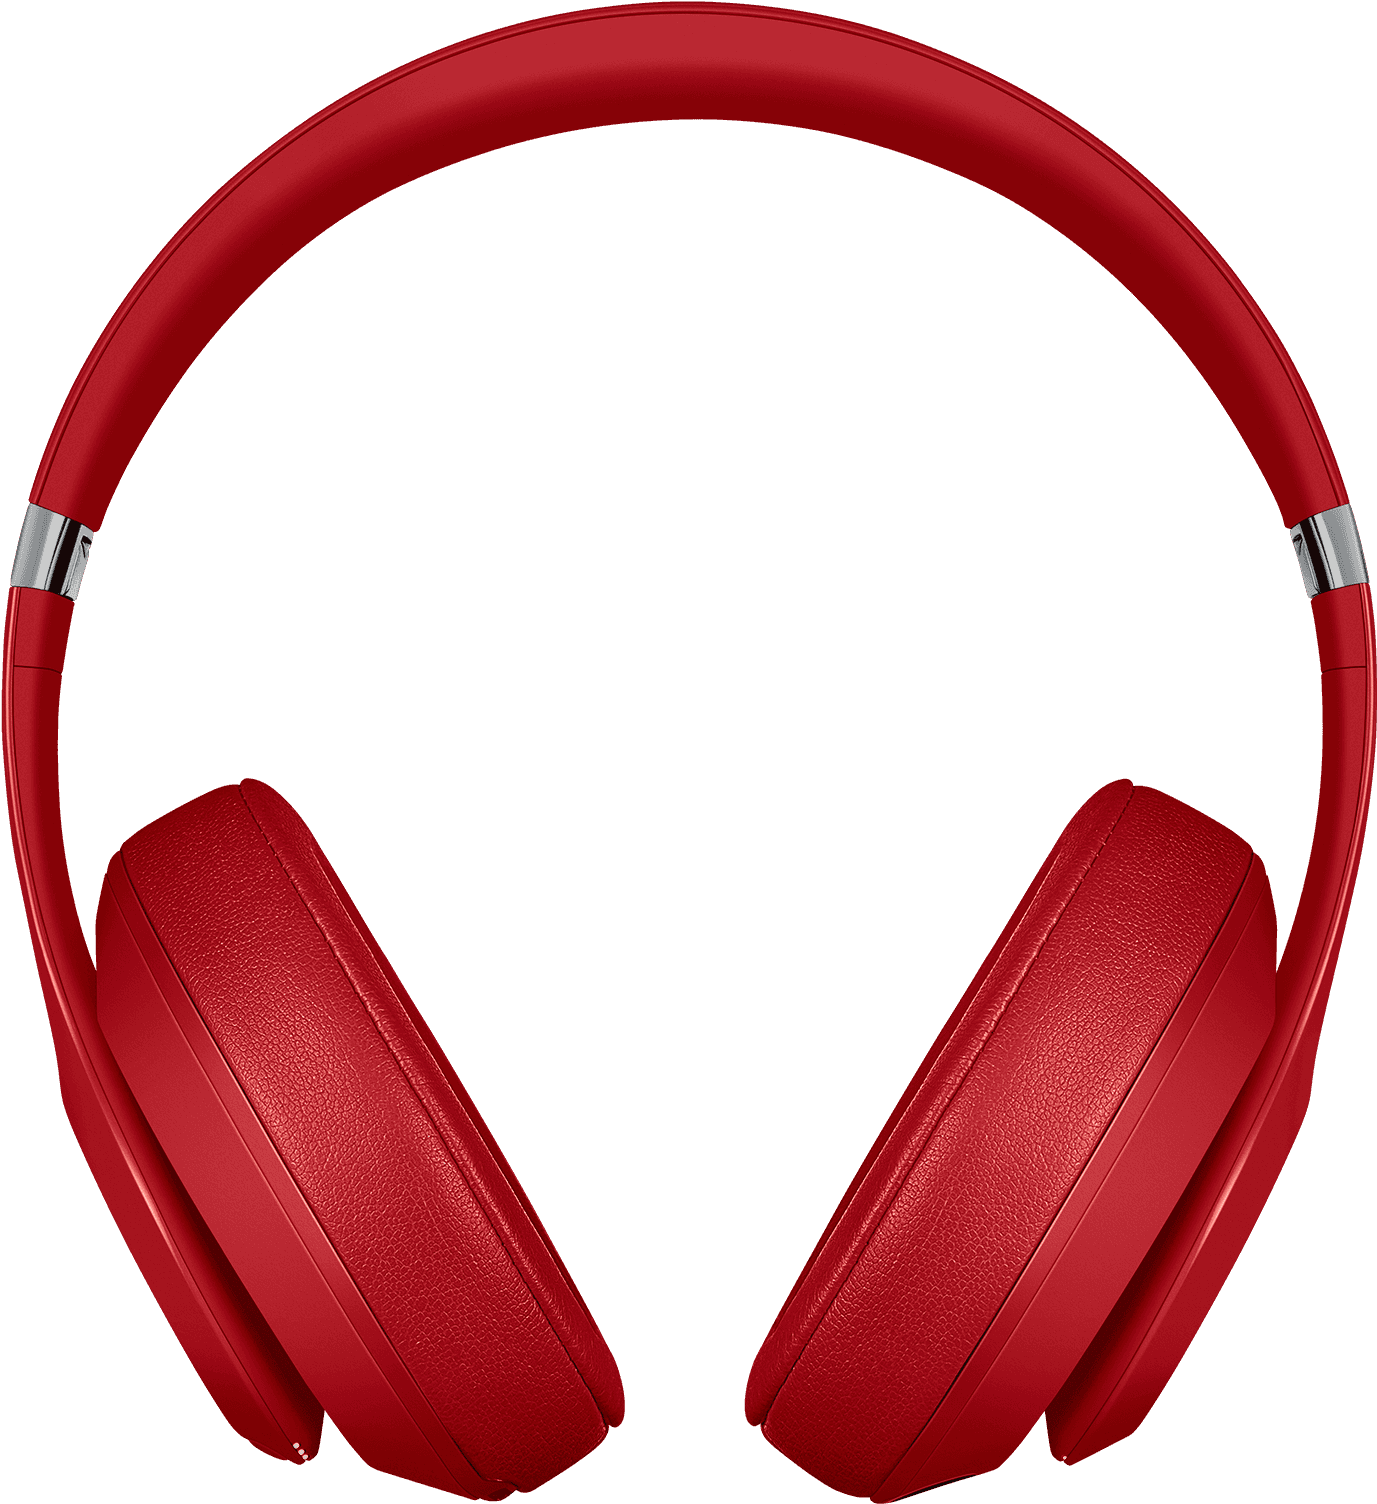 A Red Headphones On A Black Background